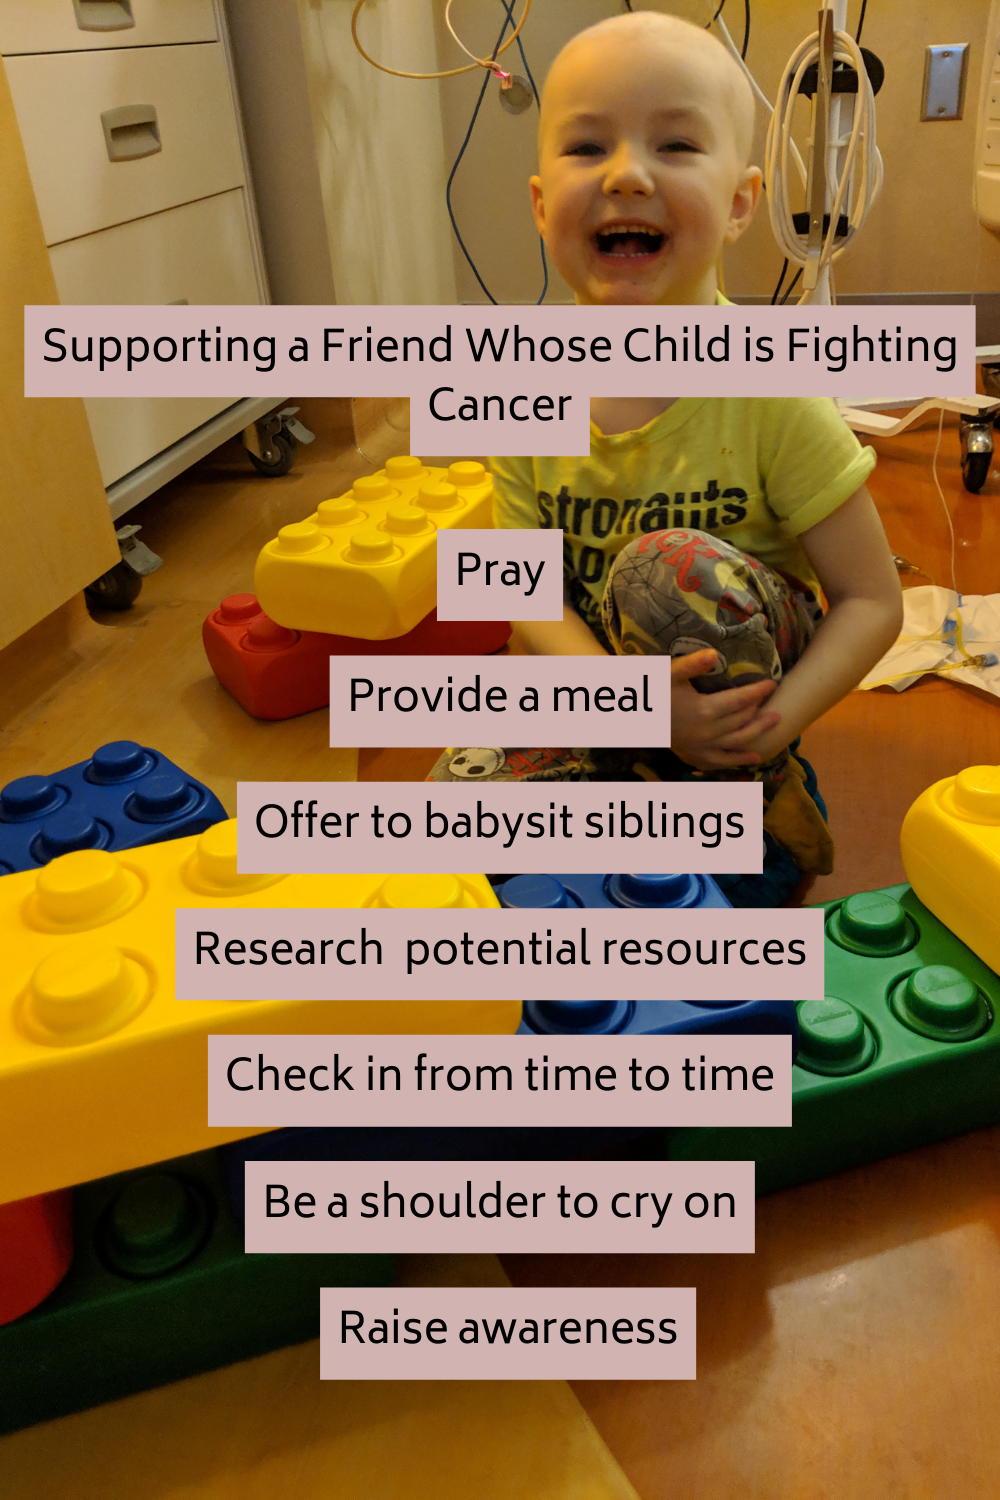 Supporting a Friend Whose Child is Fighting Cancer